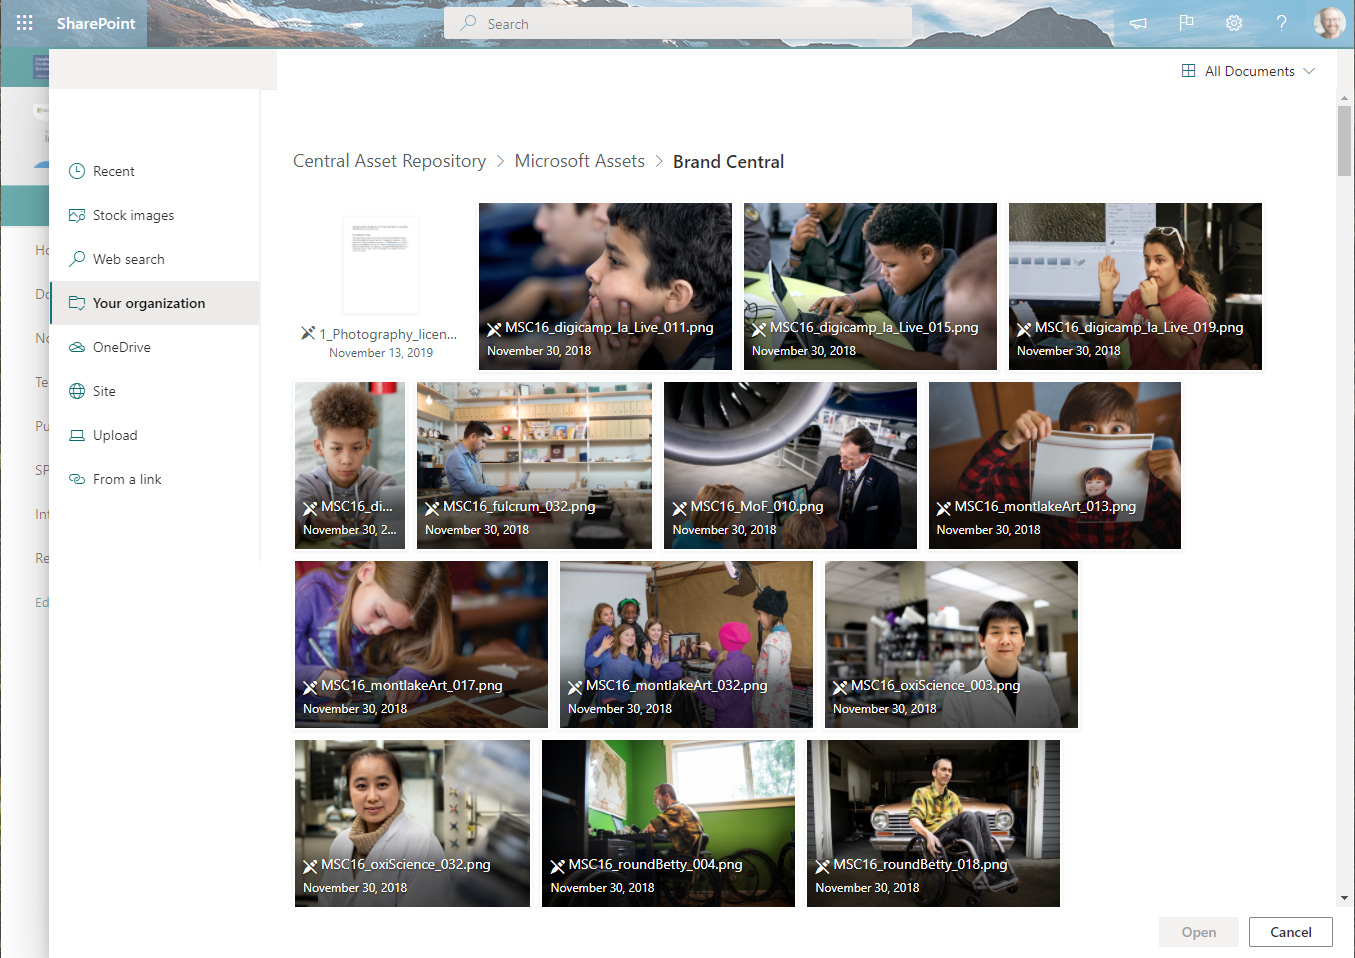 Use images from your organization when adding photos to your SharePoint pages or news.